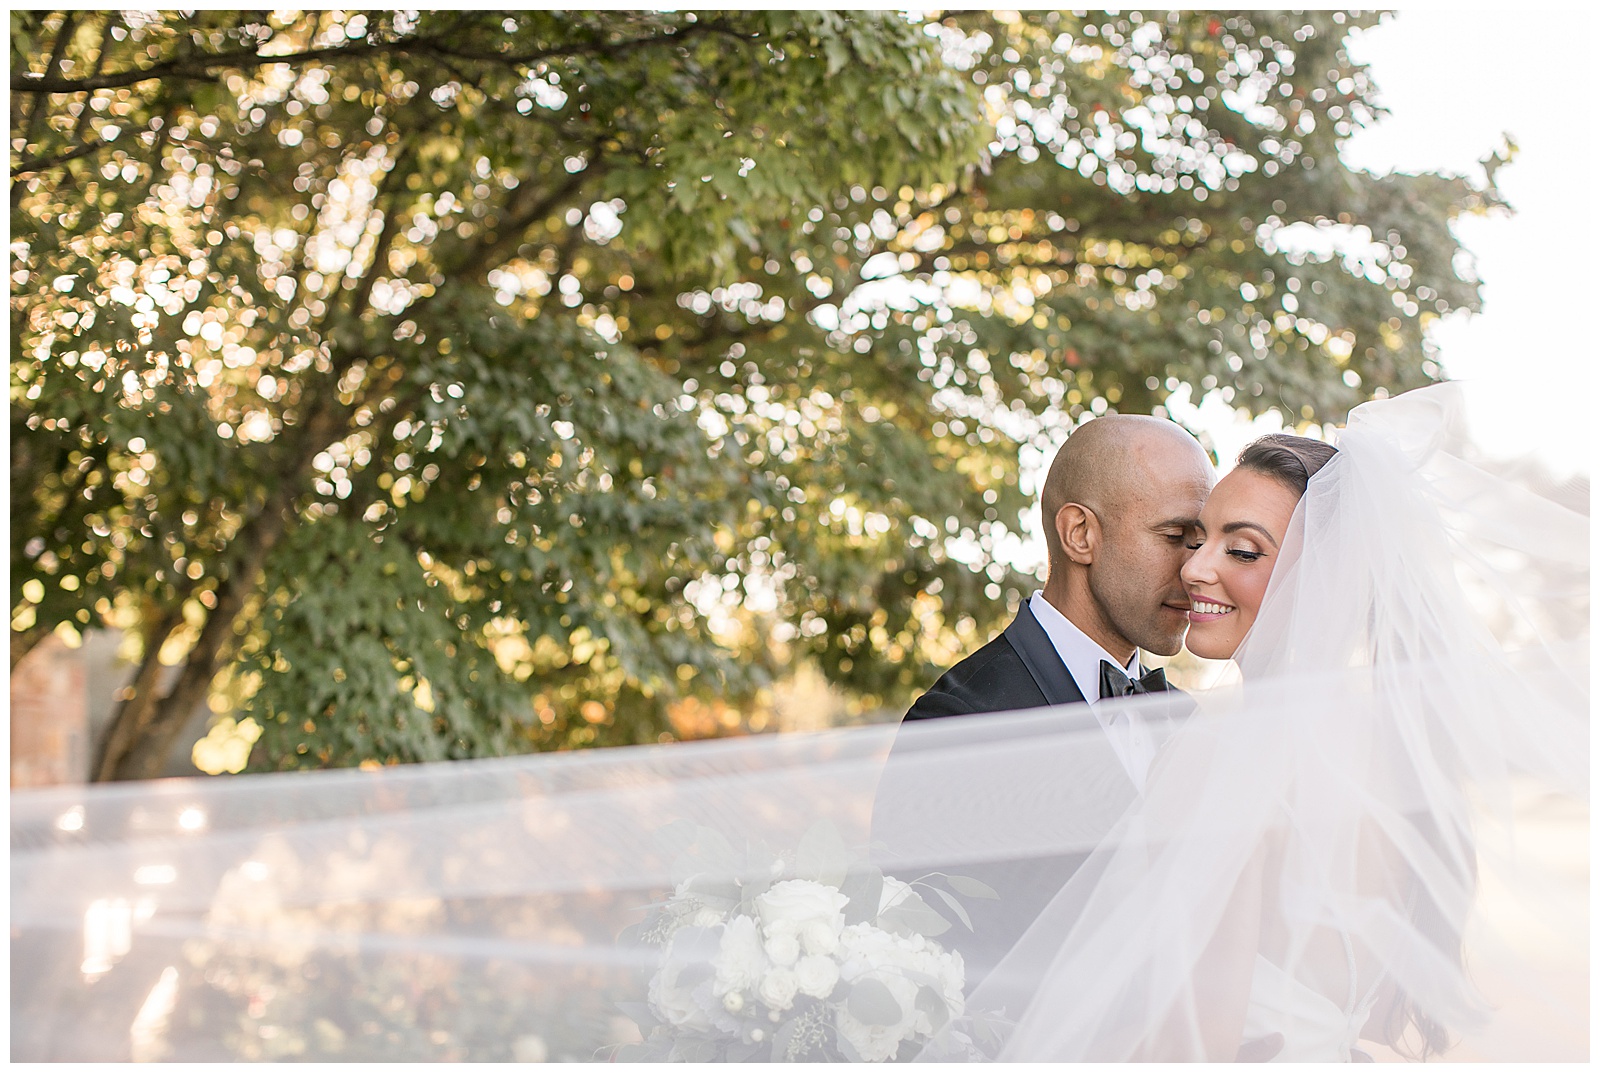 groom kissing bride as she looks over left shoulder and her long white veil swirls around them with trees and sunset in background